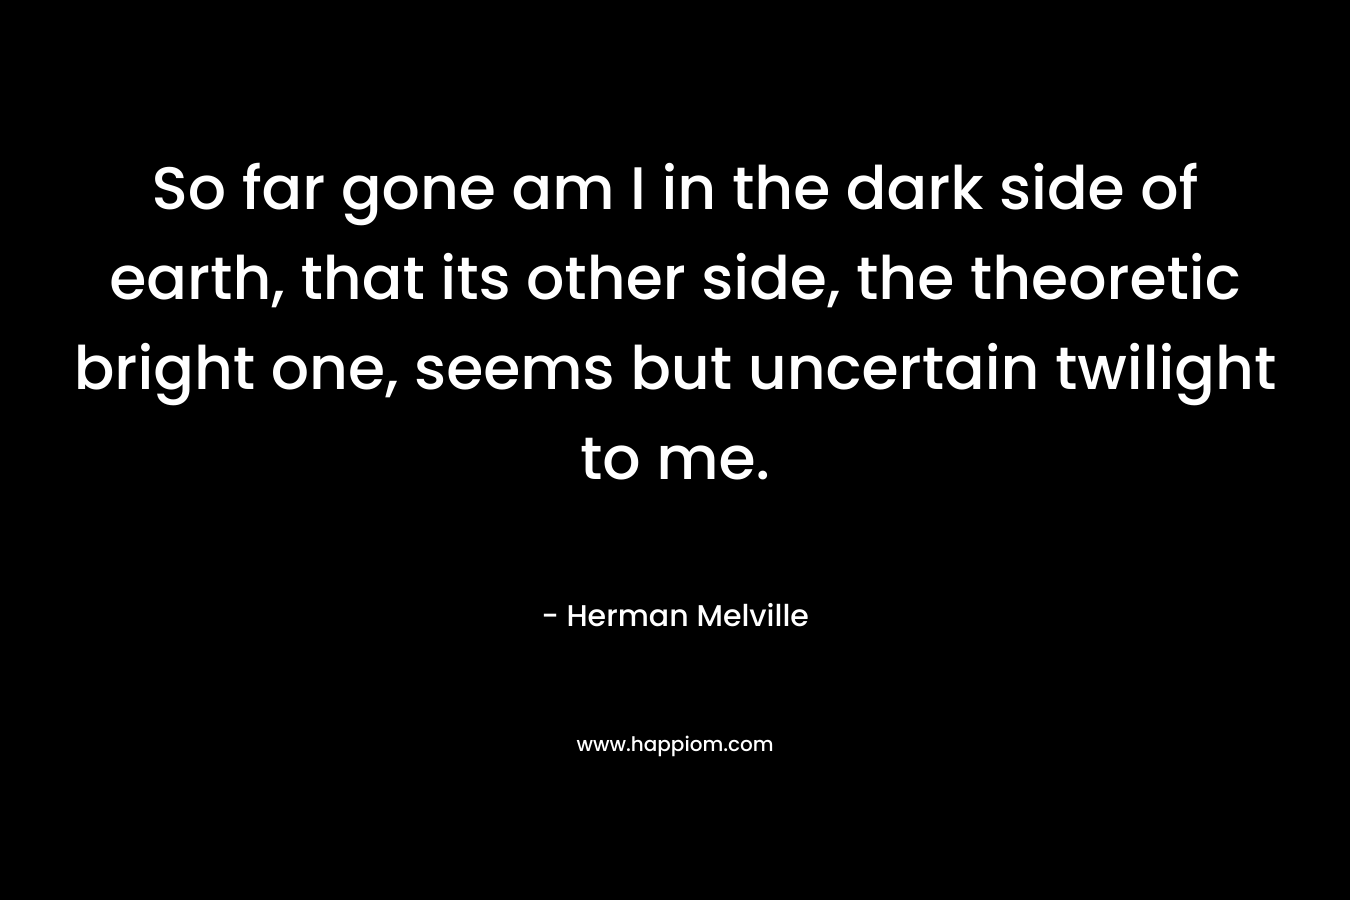 So far gone am I in the dark side of earth, that its other side, the theoretic bright one, seems but uncertain twilight to me. – Herman Melville